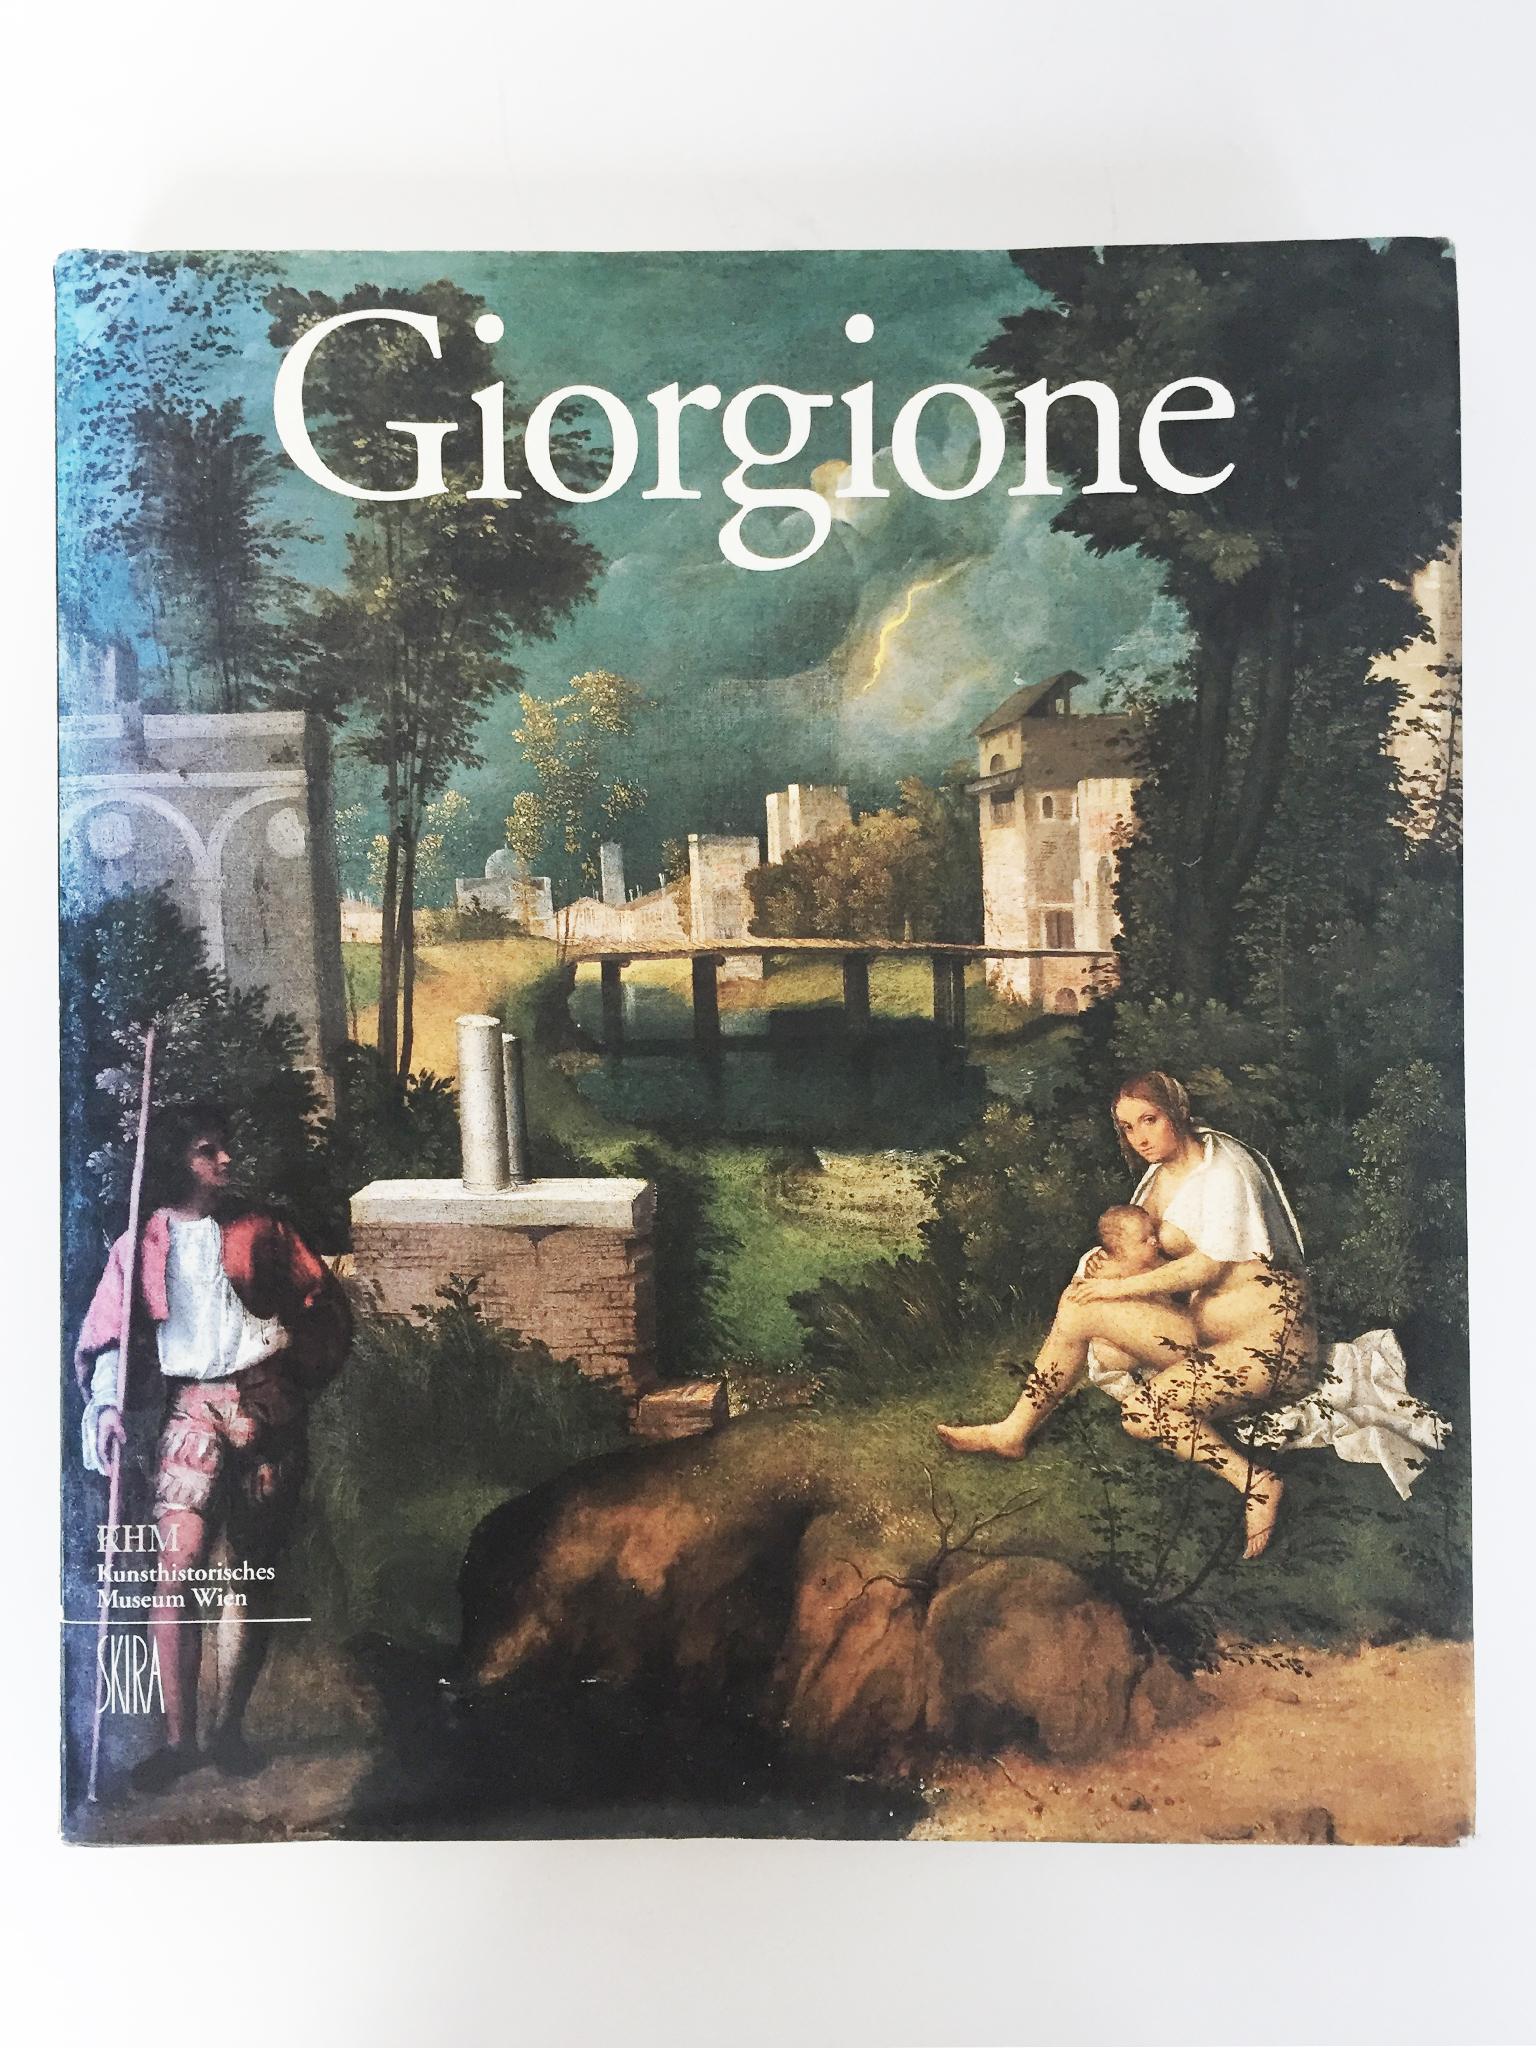 Giorgione: Myth and Enigma
Edited by Sylvia Ferino-Pagden and Giovanna Nepi Scirè
Published by Skira (2004)
Hardcover
310 pages
Black and white and color illustrations

Description from the publisher:

